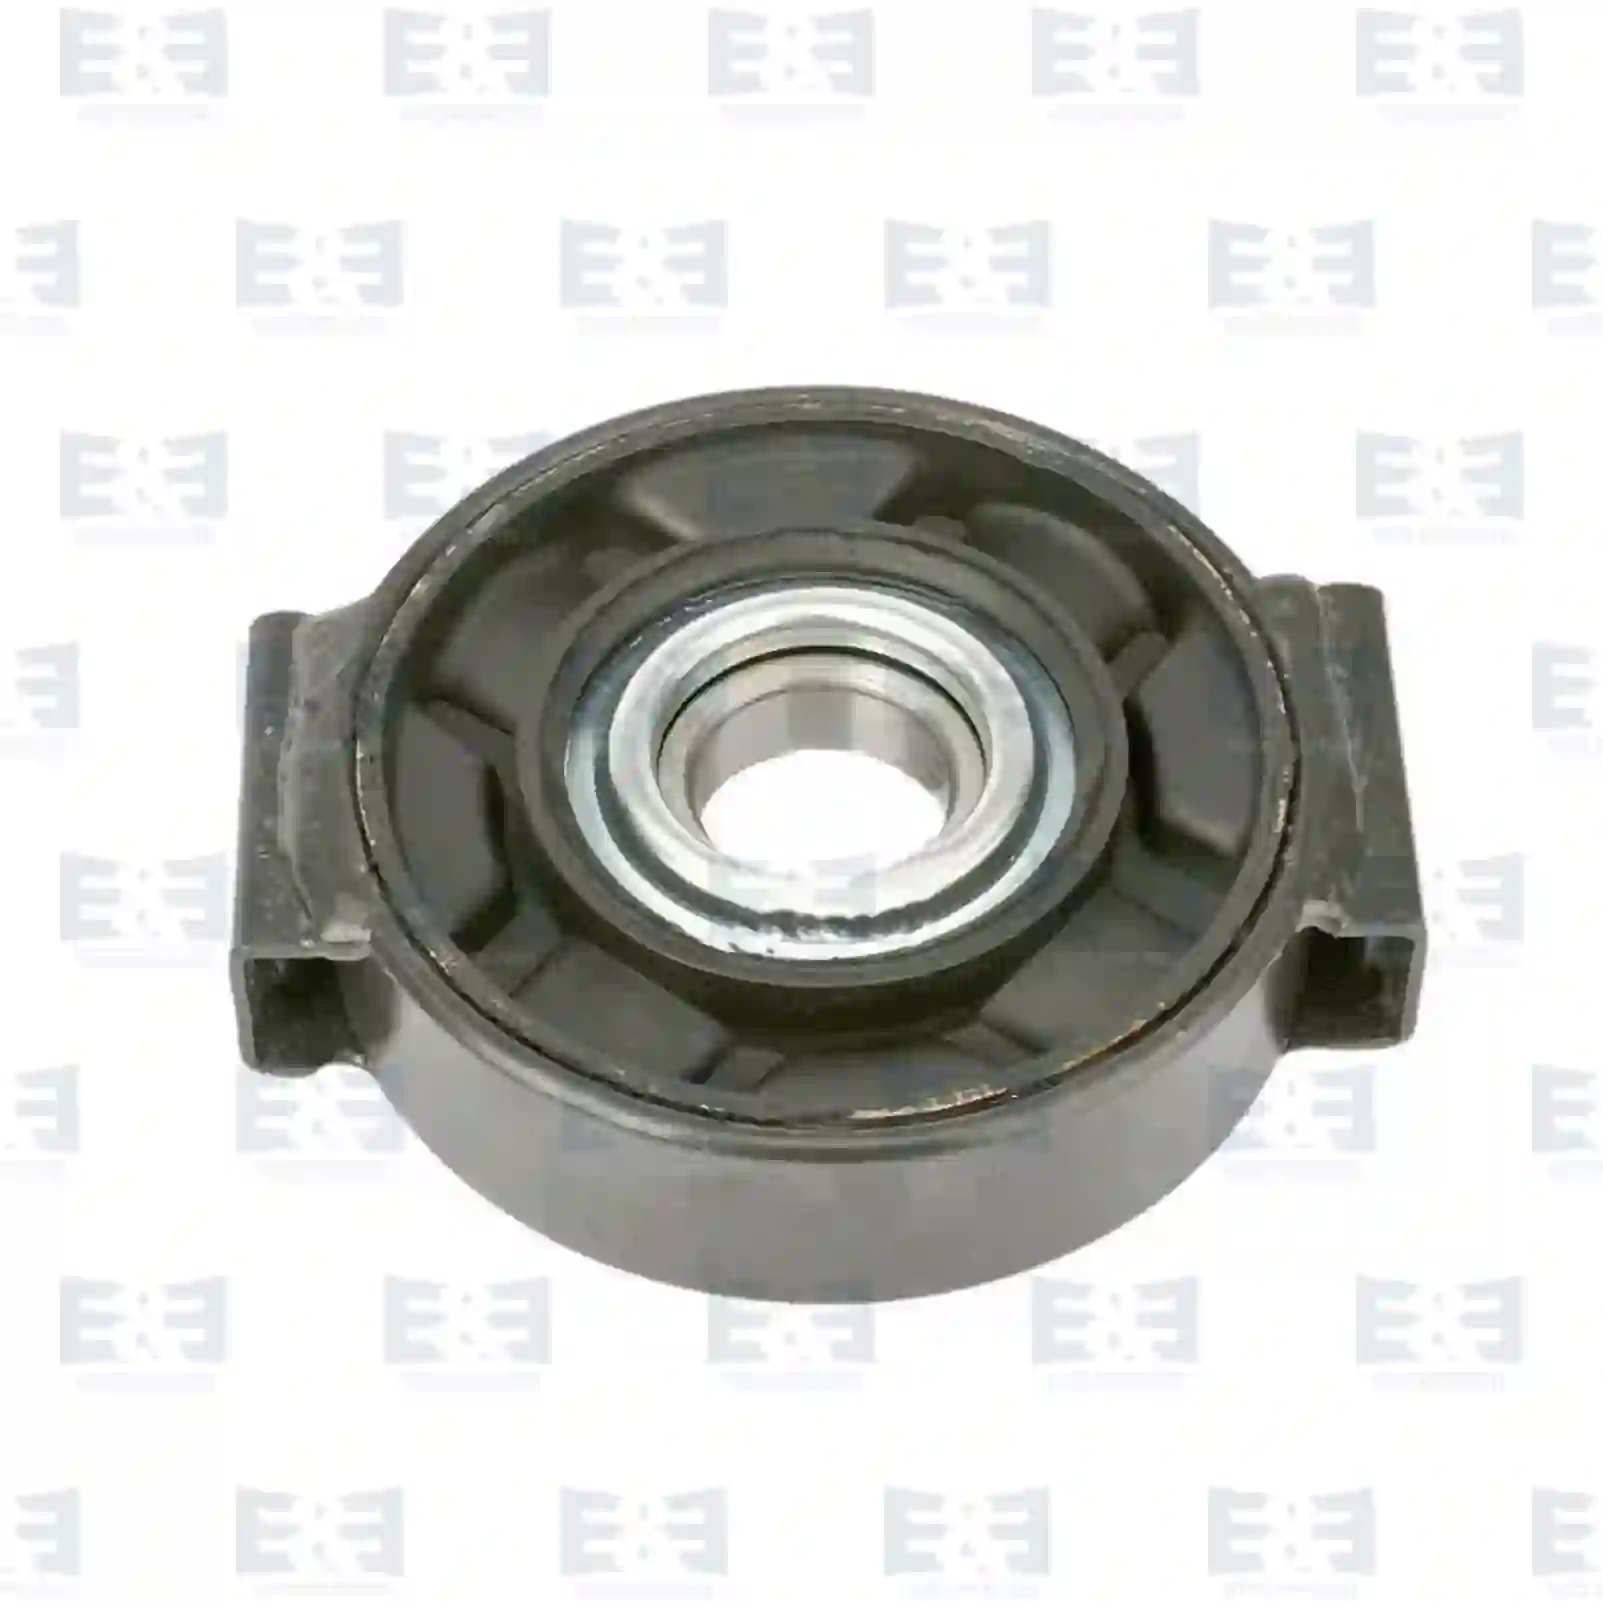 Support Bearing Center bearing, EE No 2E2276964 ,  oem no:4604100022, 4604100222, ZG02483-0008 E&E Truck Spare Parts | Truck Spare Parts, Auotomotive Spare Parts